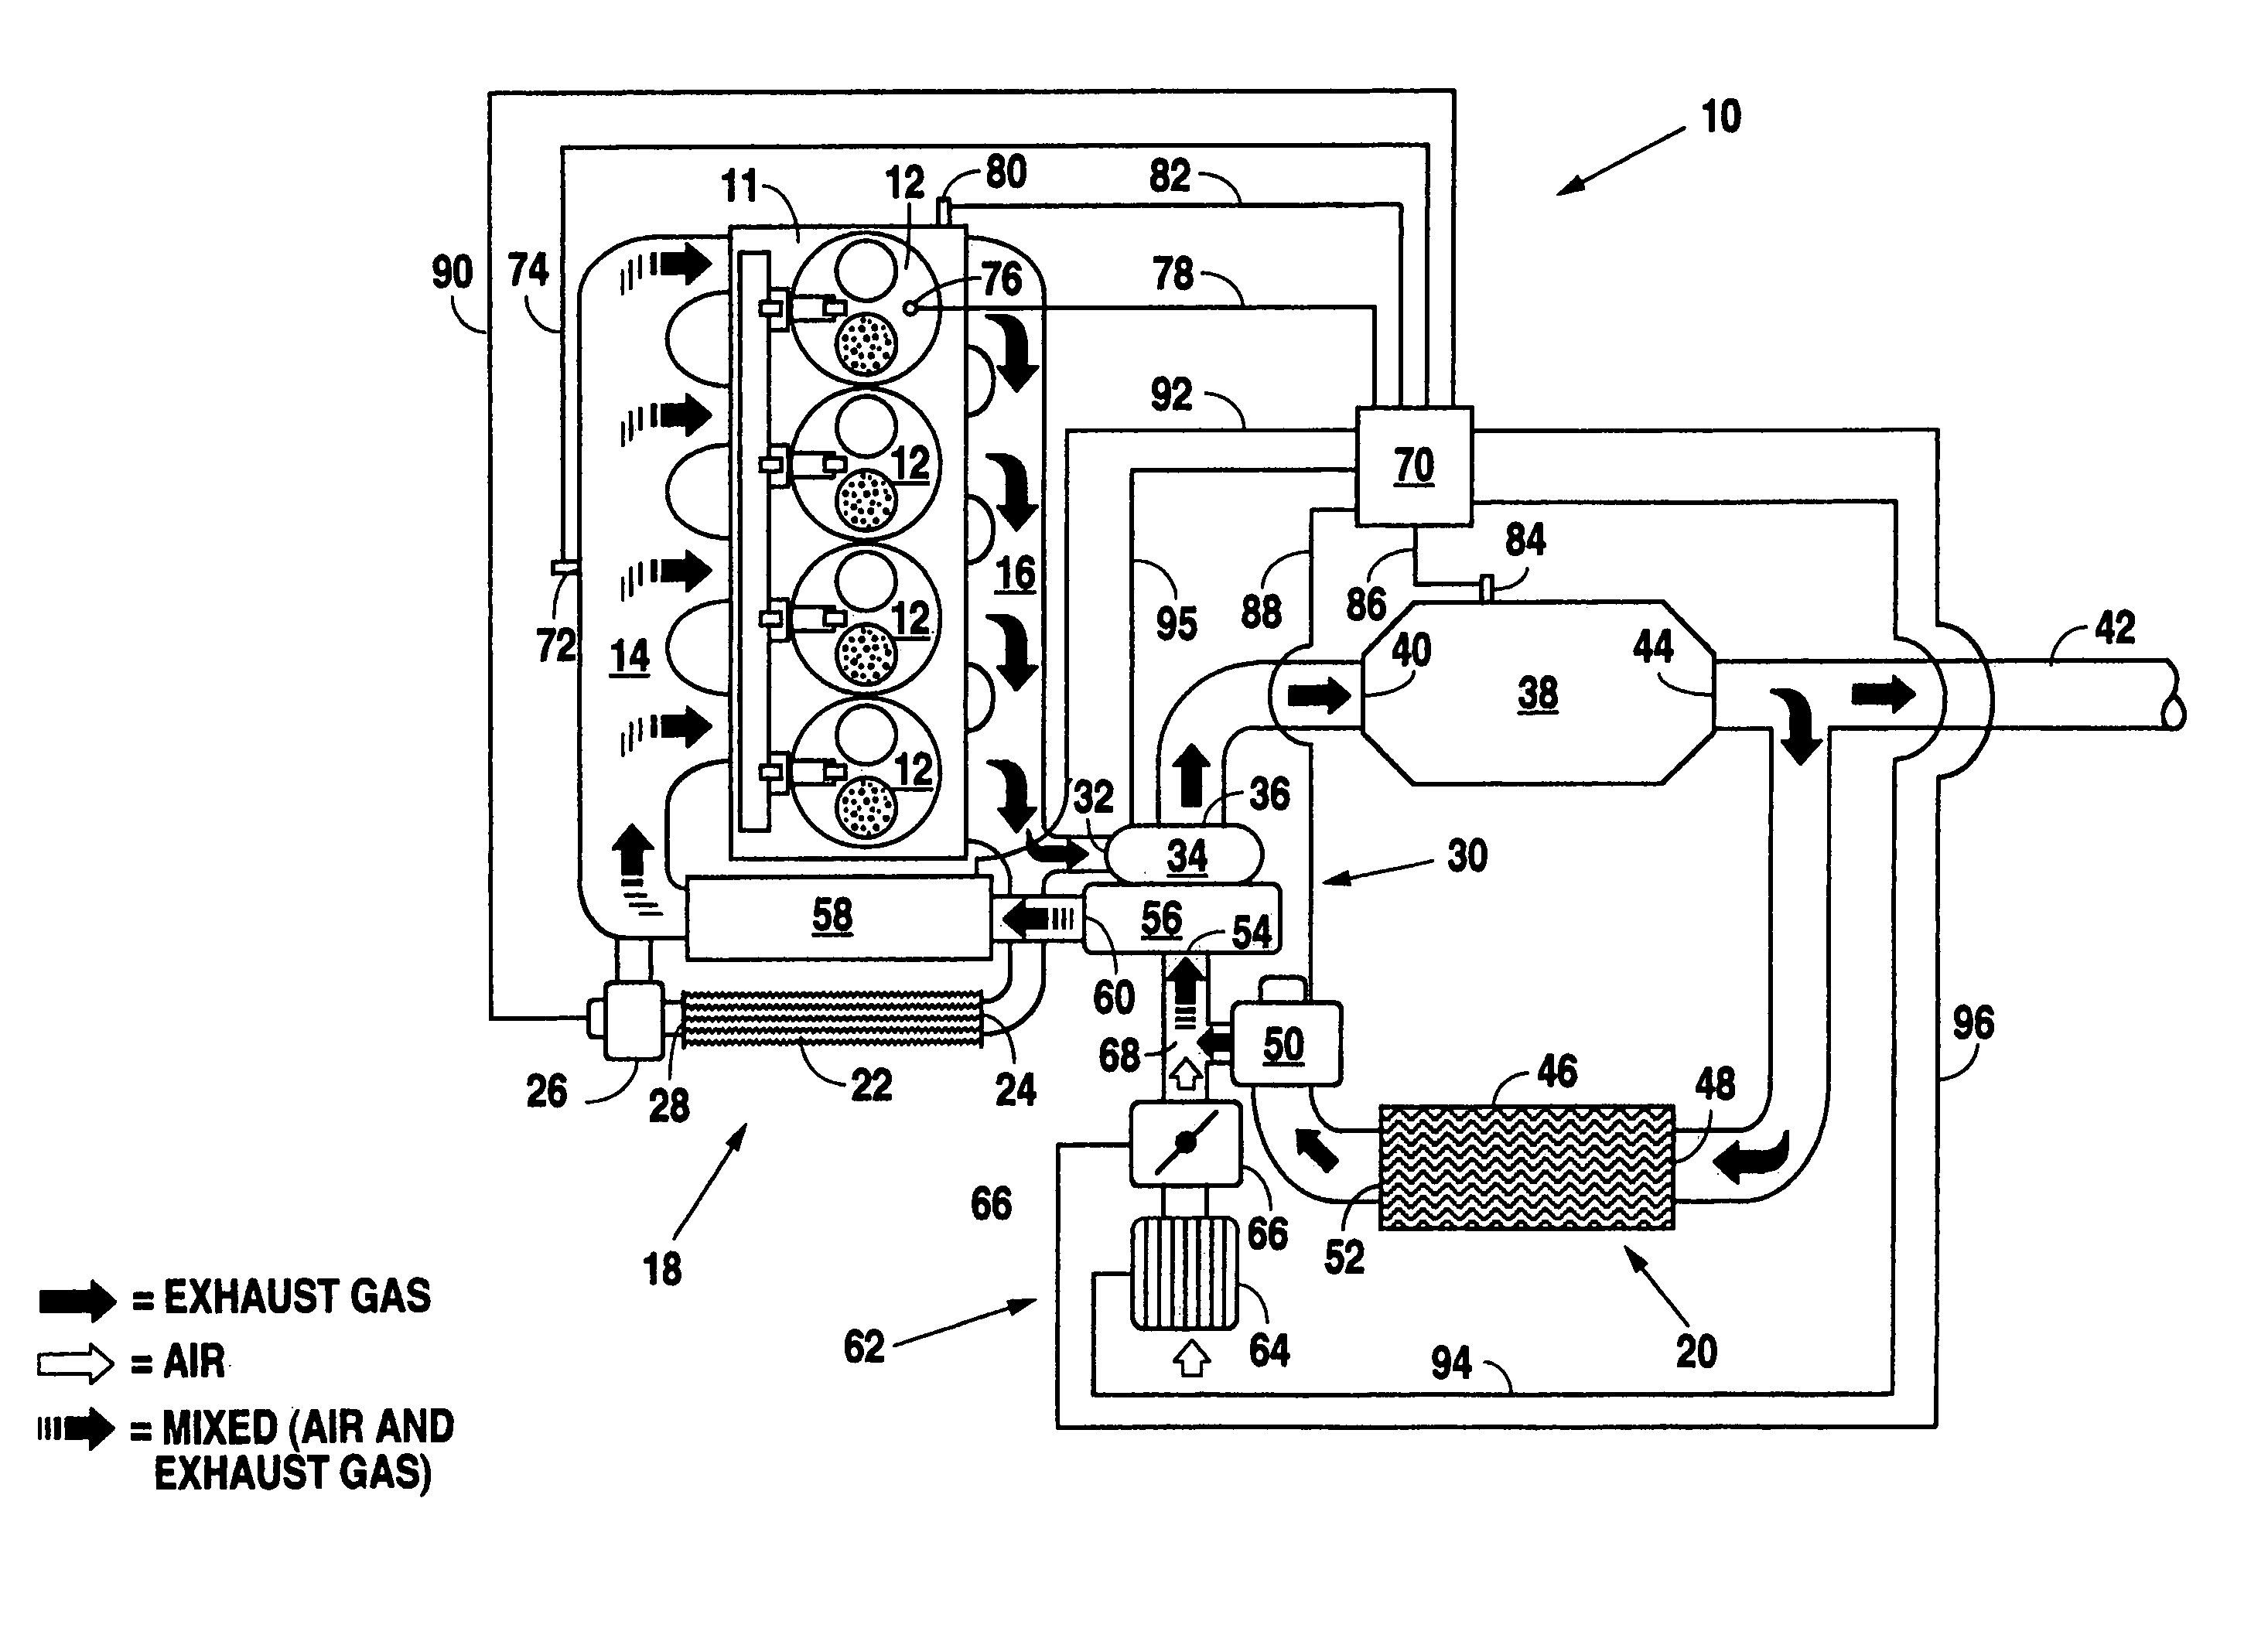 Dual loop exhaust gas recirculation system for diesel engines and method of operation